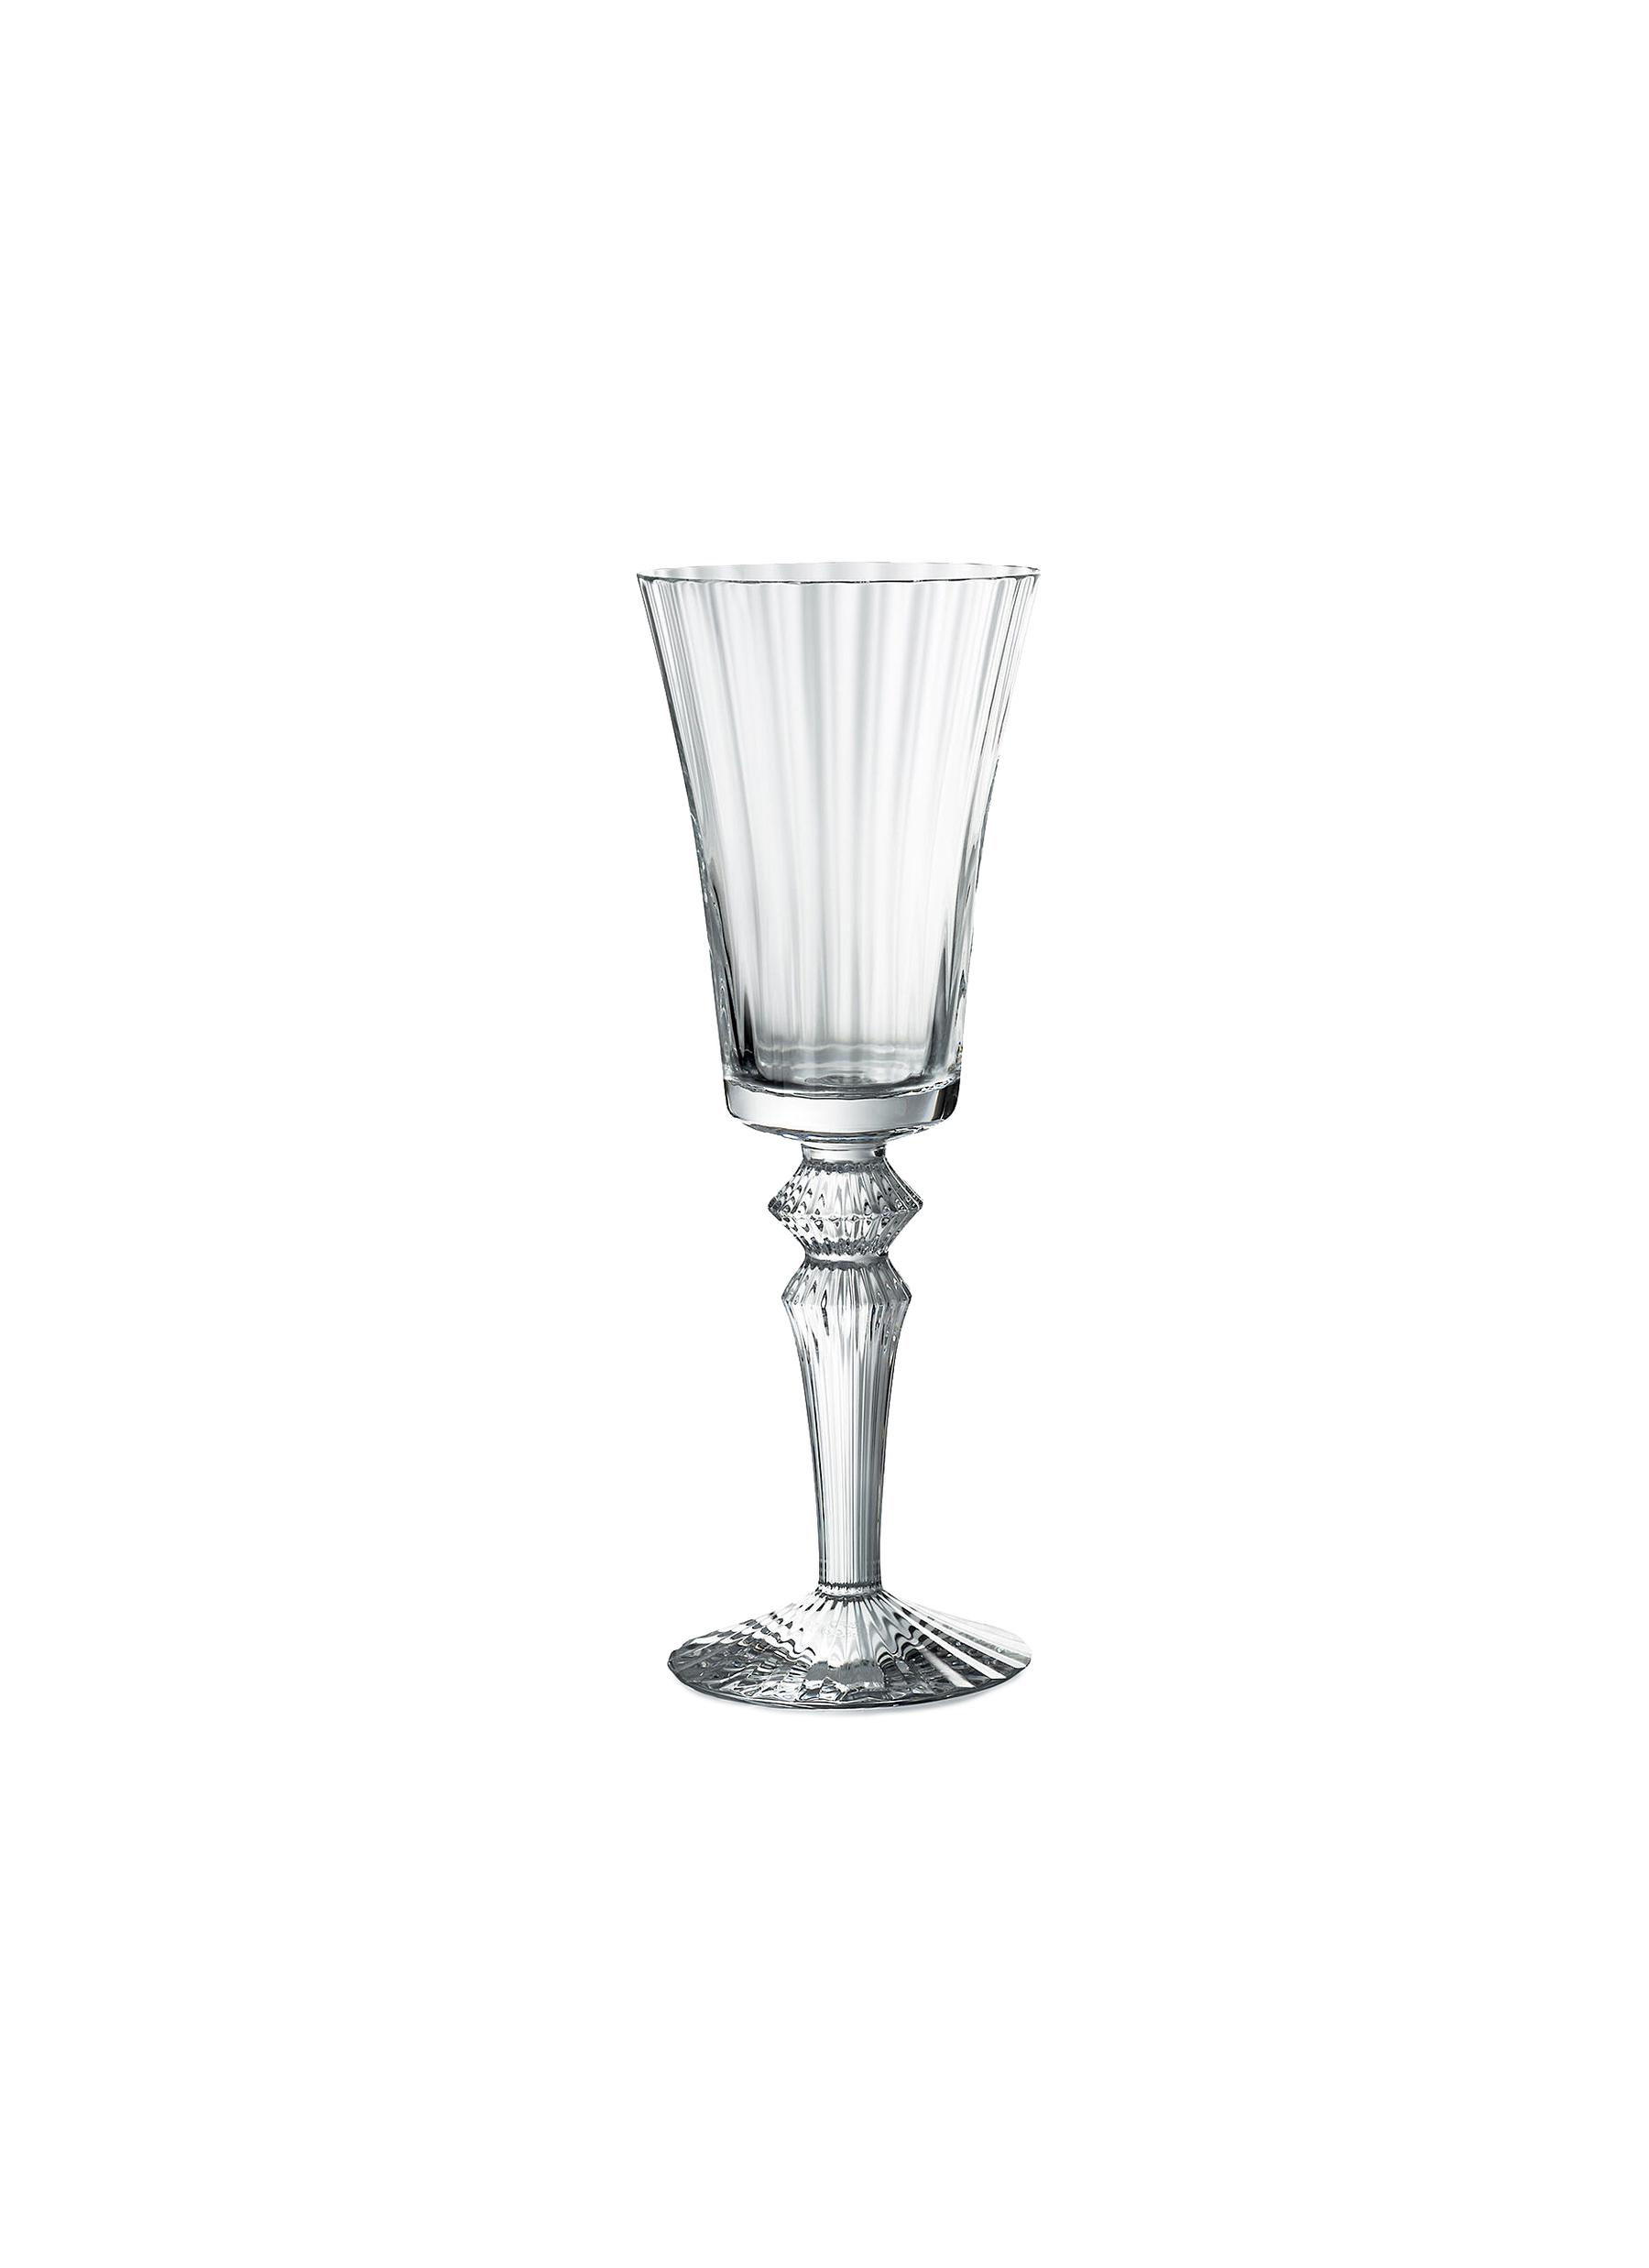 MEDIUM MILLE NUITS GLASS - CLEAR